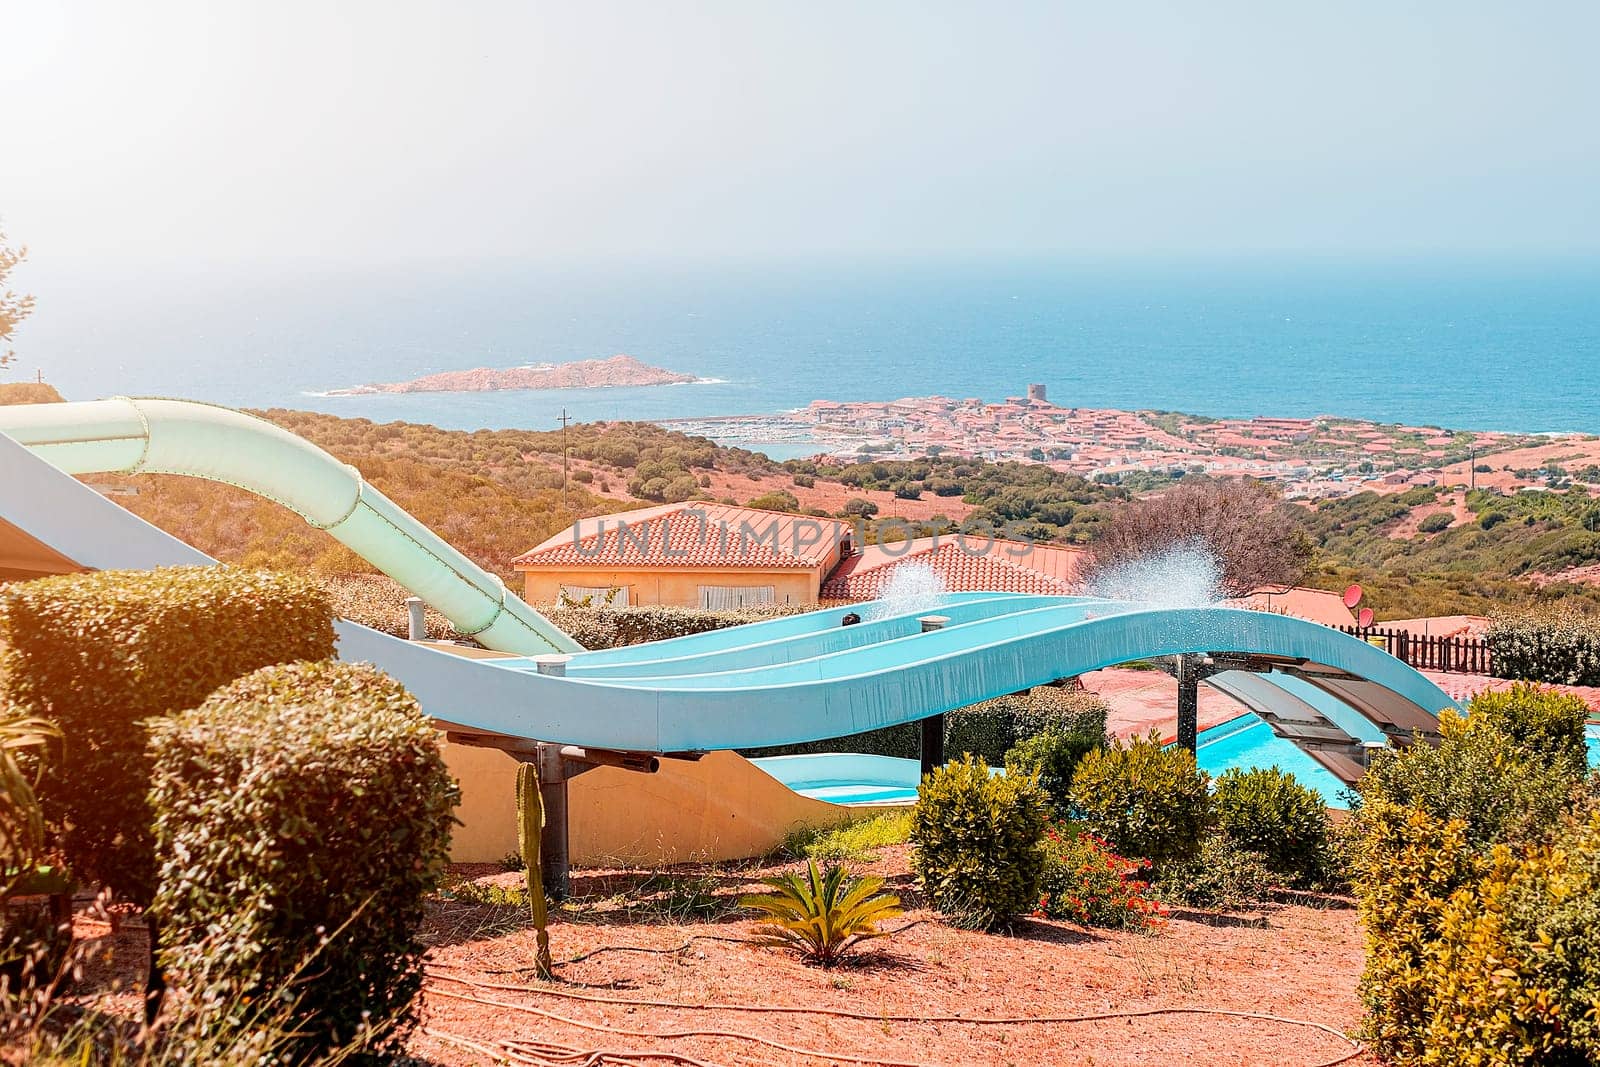 Grand slide in water park with a view of the blue sea in Sardinia, Italy